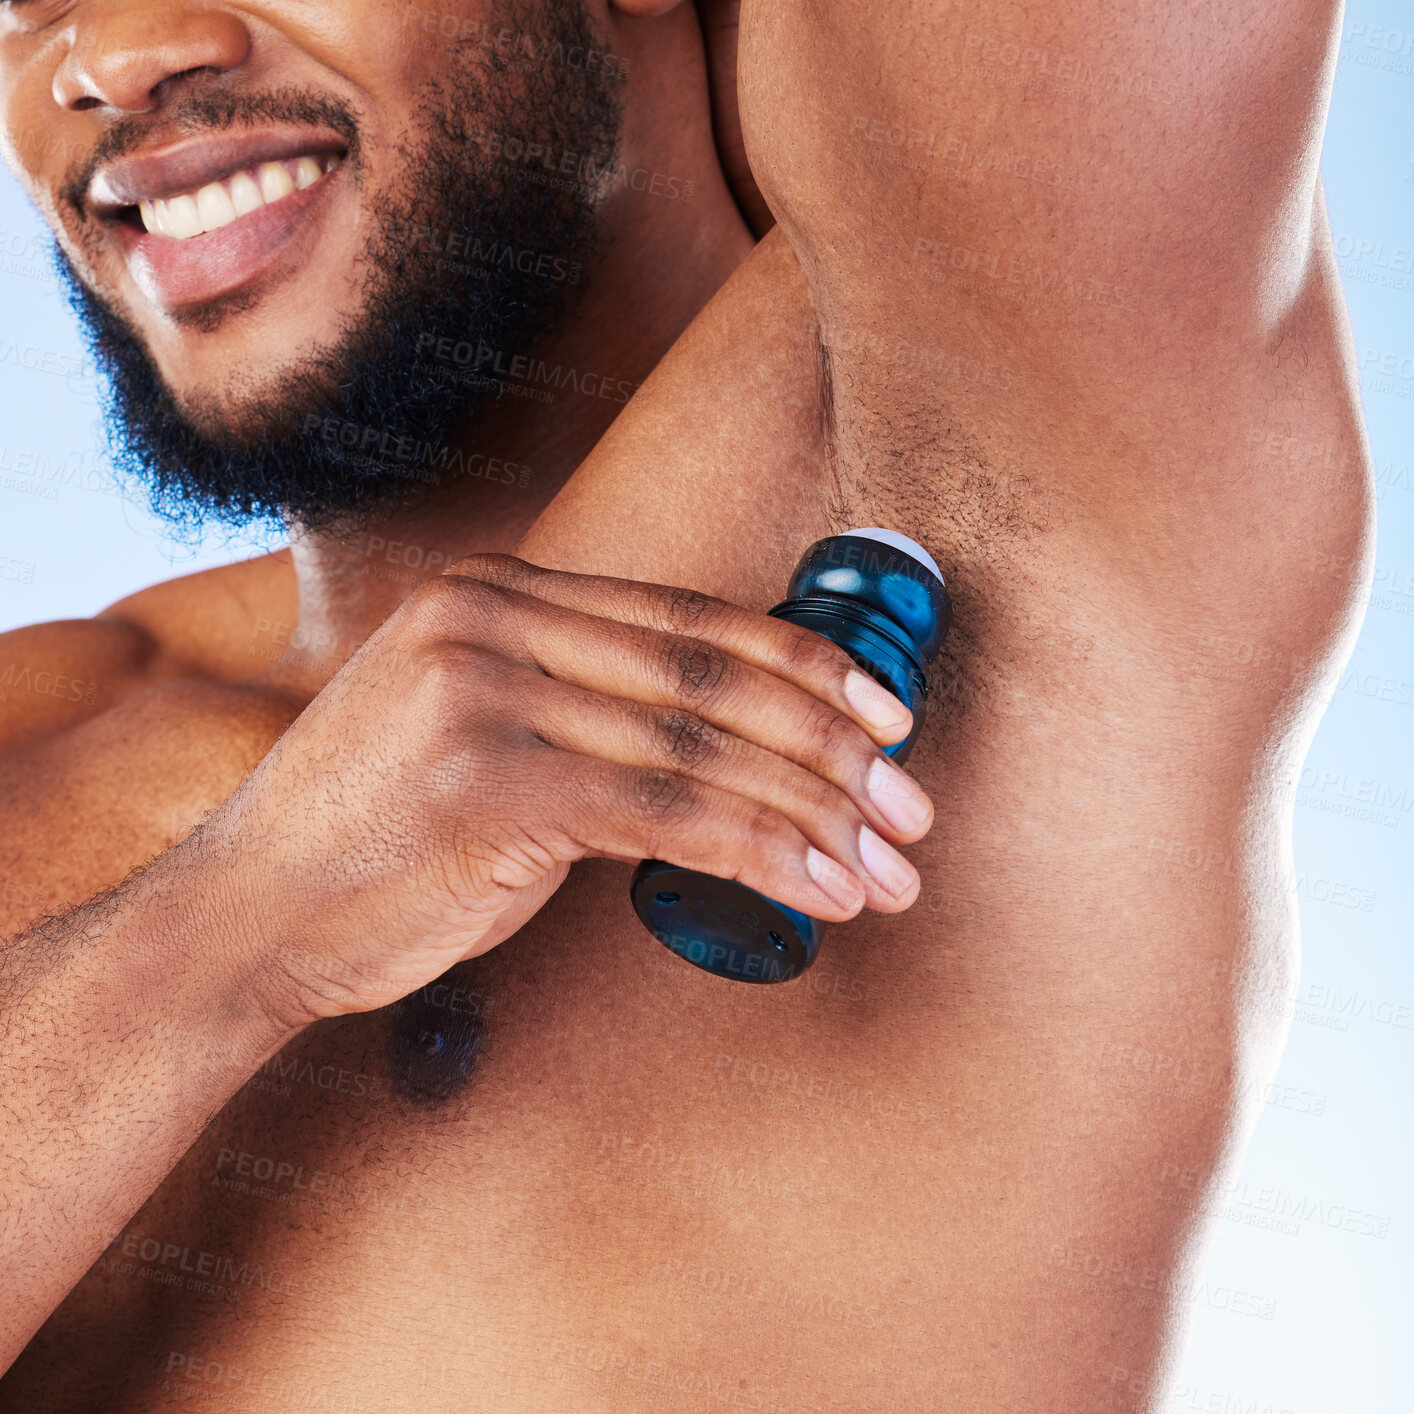 Buy stock photo Deodorant, armpit and black man with products for beauty, grooming and body hygiene on blue background. Skincare, wellness and male with antiperspirant, fragrance and scent product for fresh underarm